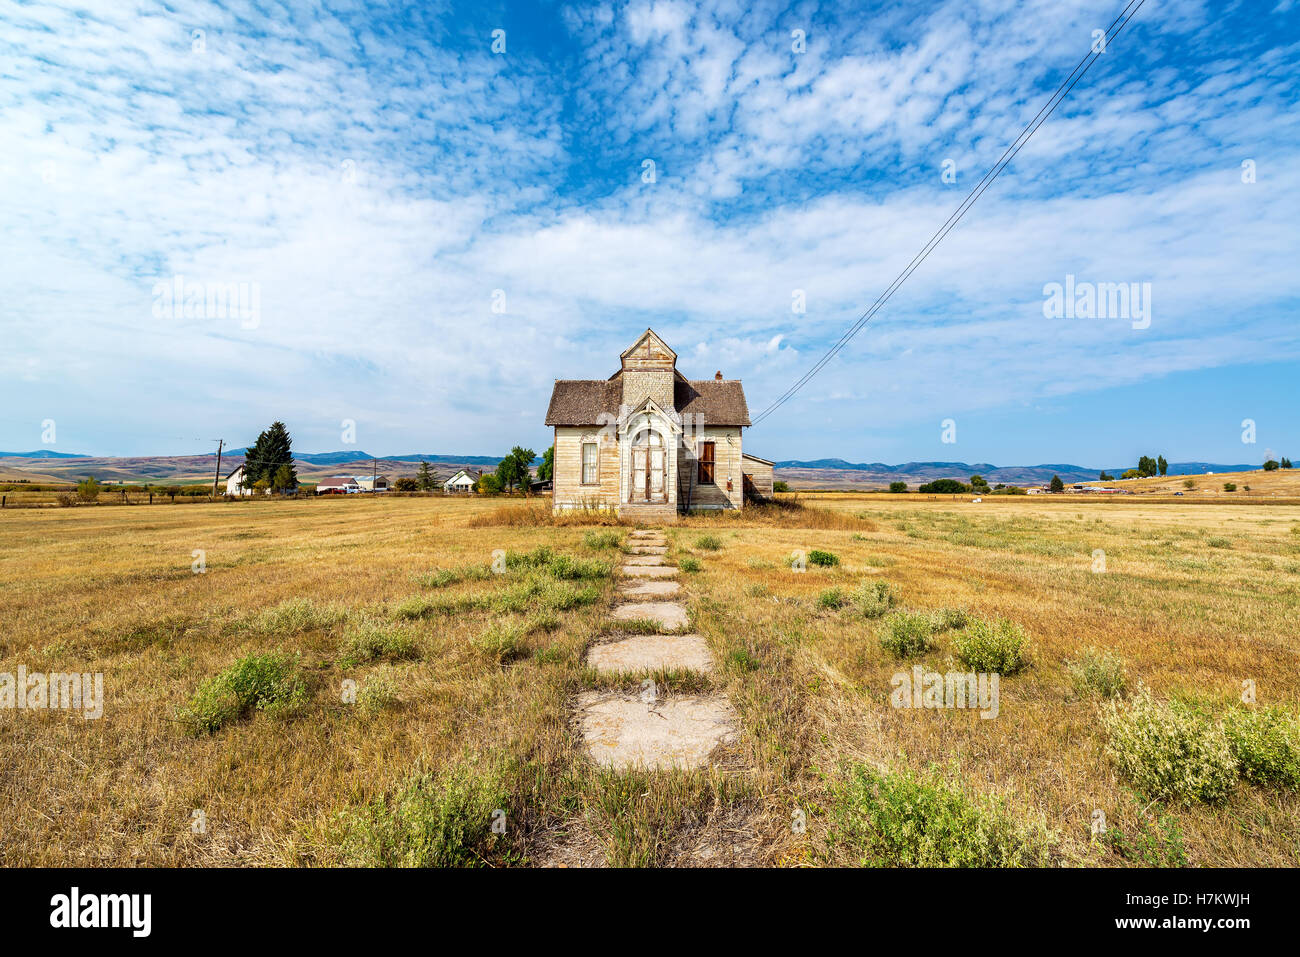 Wide angle view of an old abandoned house in Ovid, Idaho Stock Photo